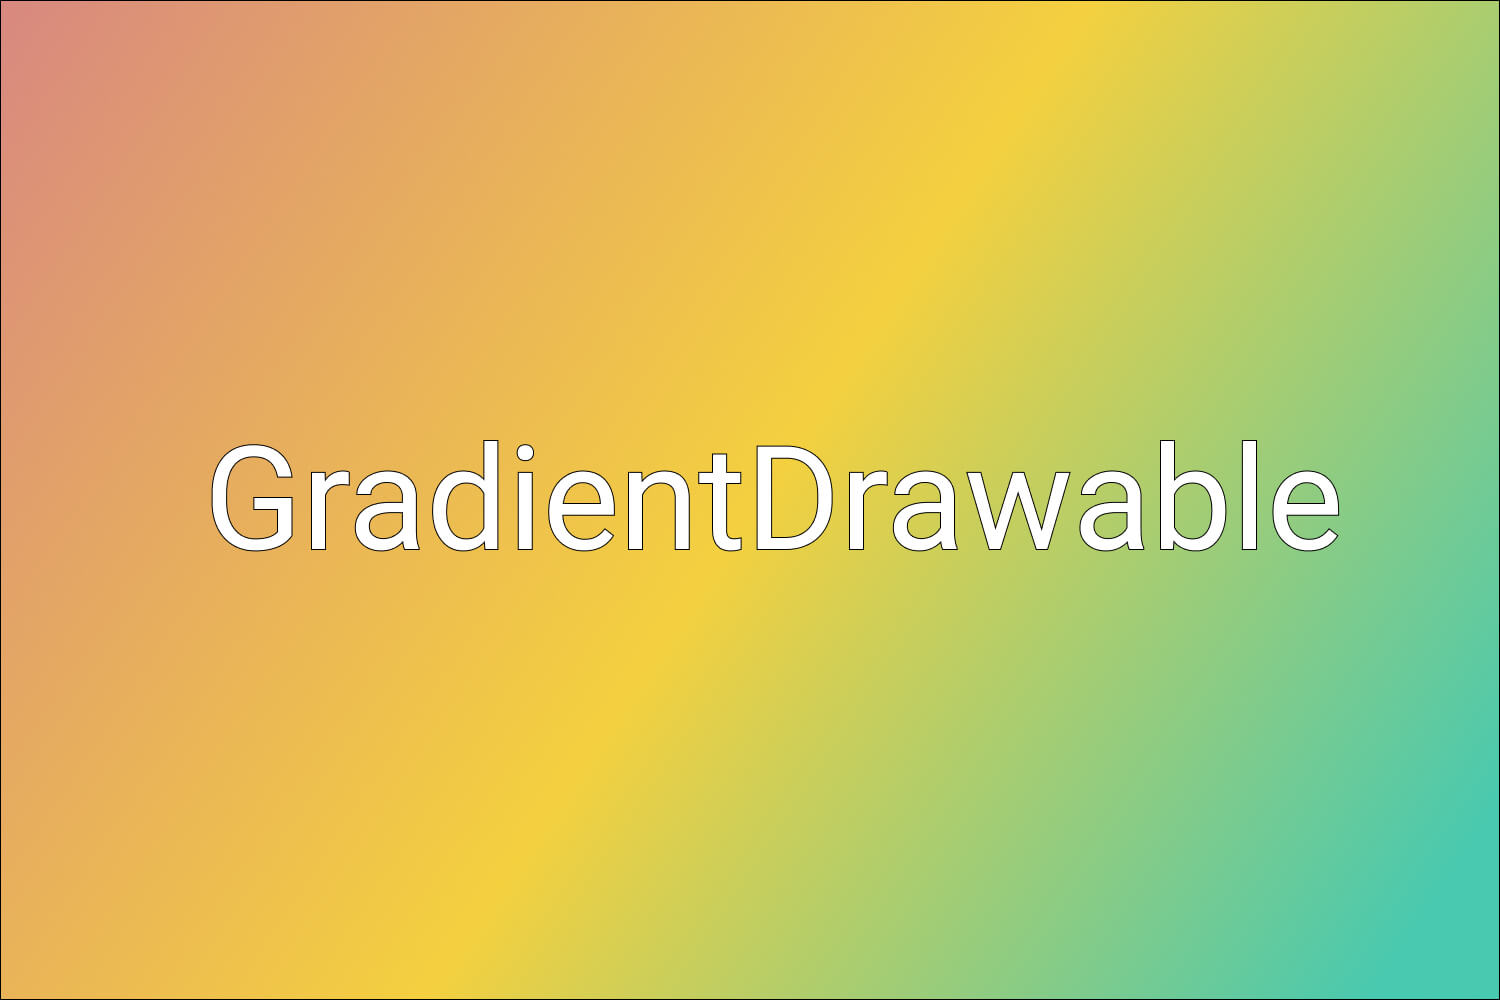 GradientDrawable - When and How to use it in Android